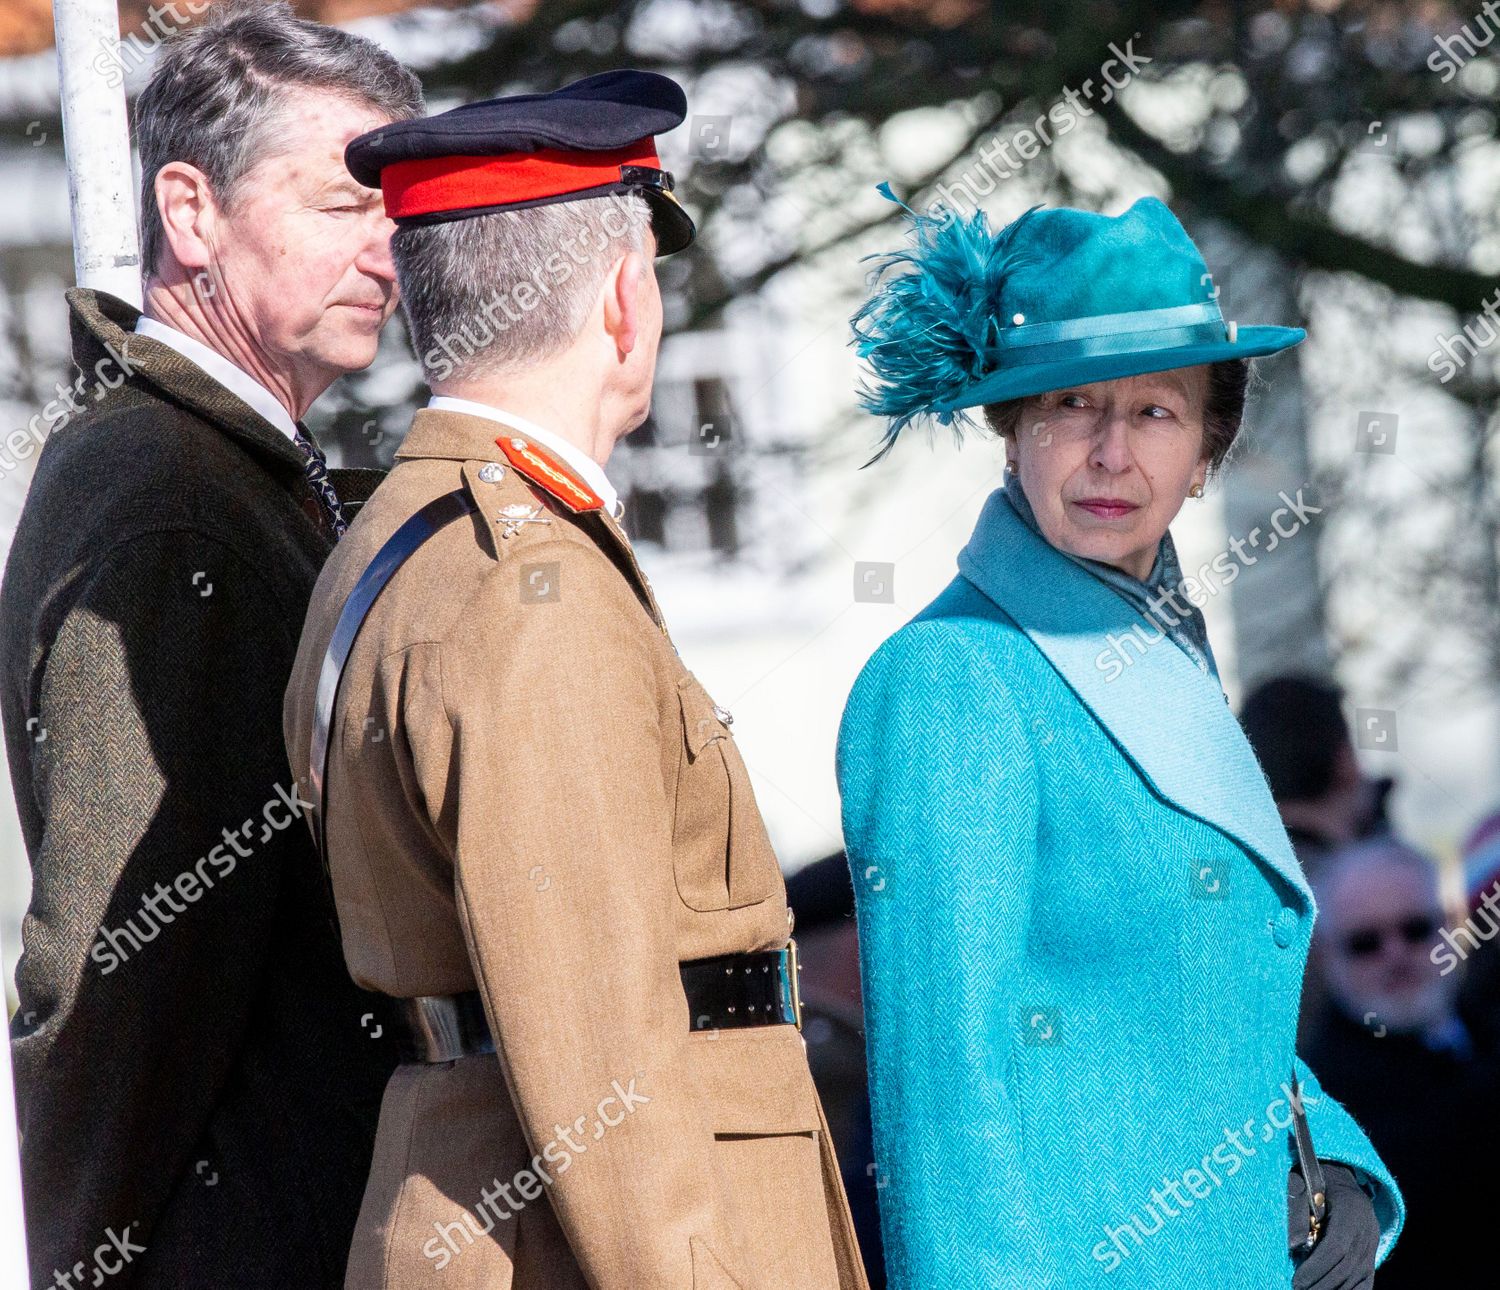 princess-anne-attends-the-royal-corps-of-signals-centenary-service-salisbury-cathedral-wiltshire-uk-shutterstock-editorial-10570519p.jpg